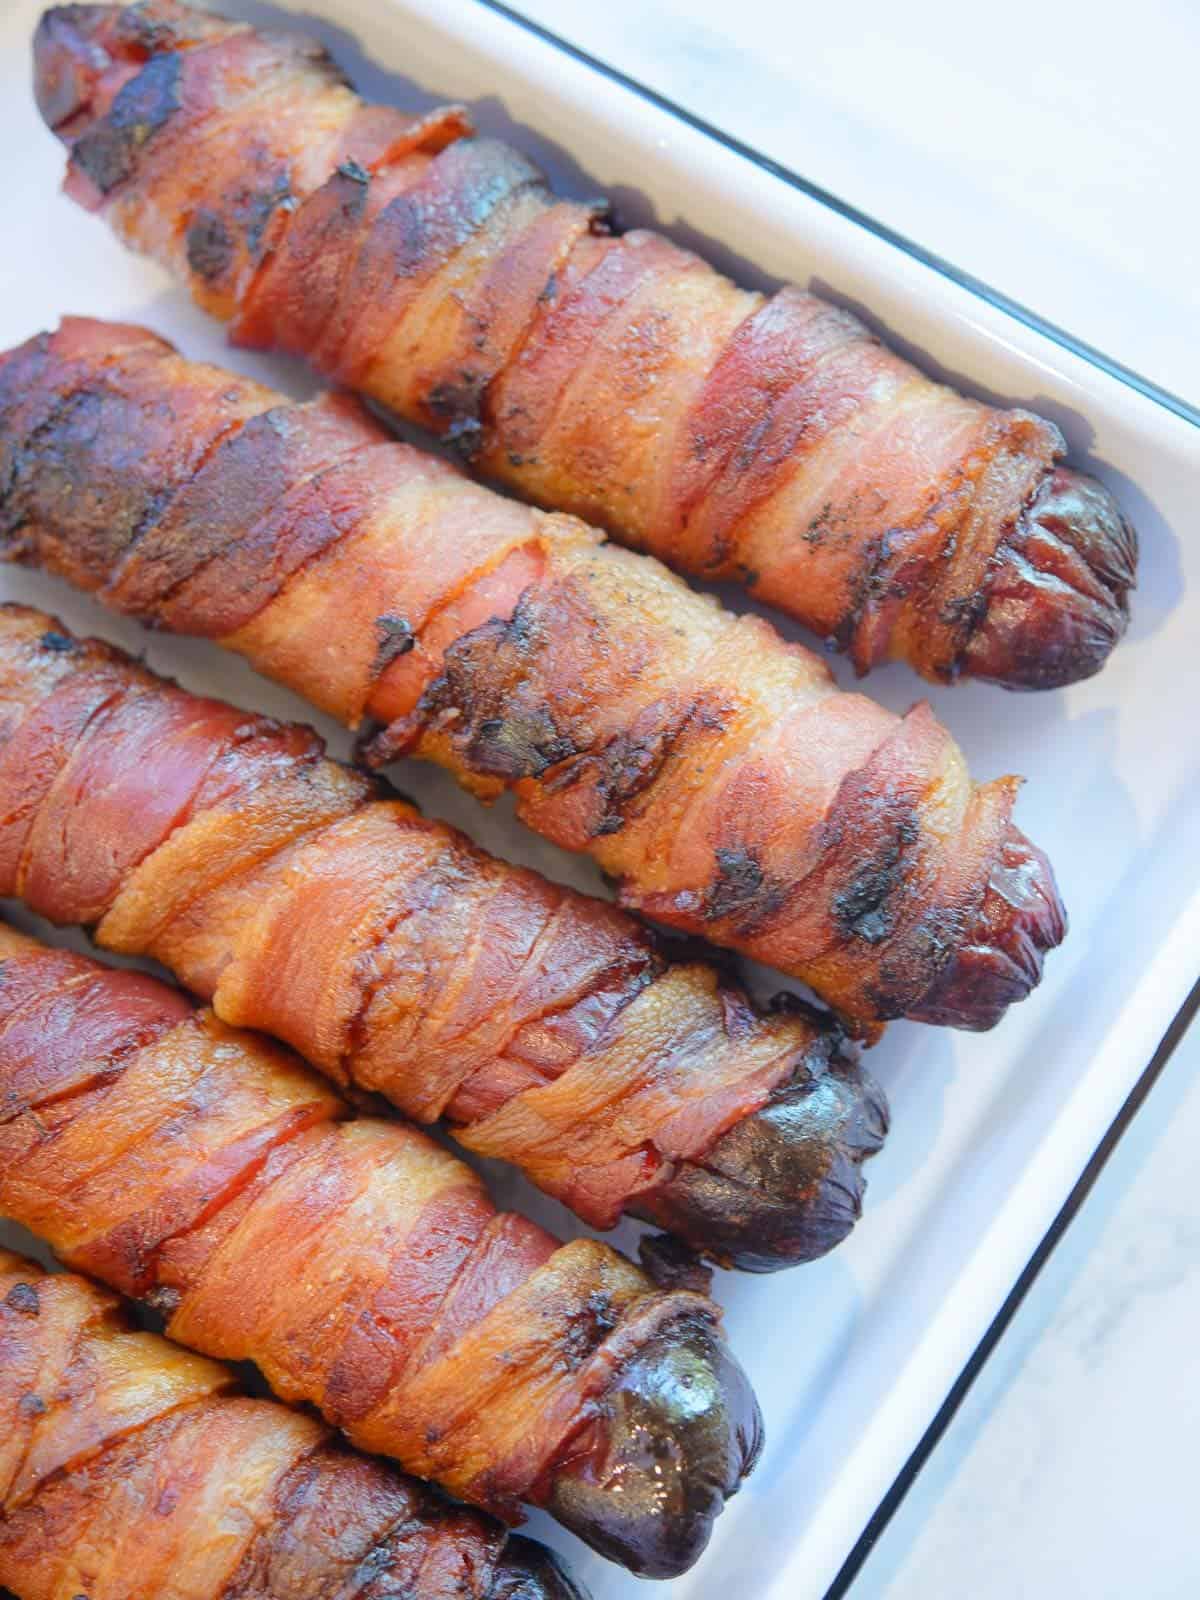 bacon wrapped hot dogs from the oven